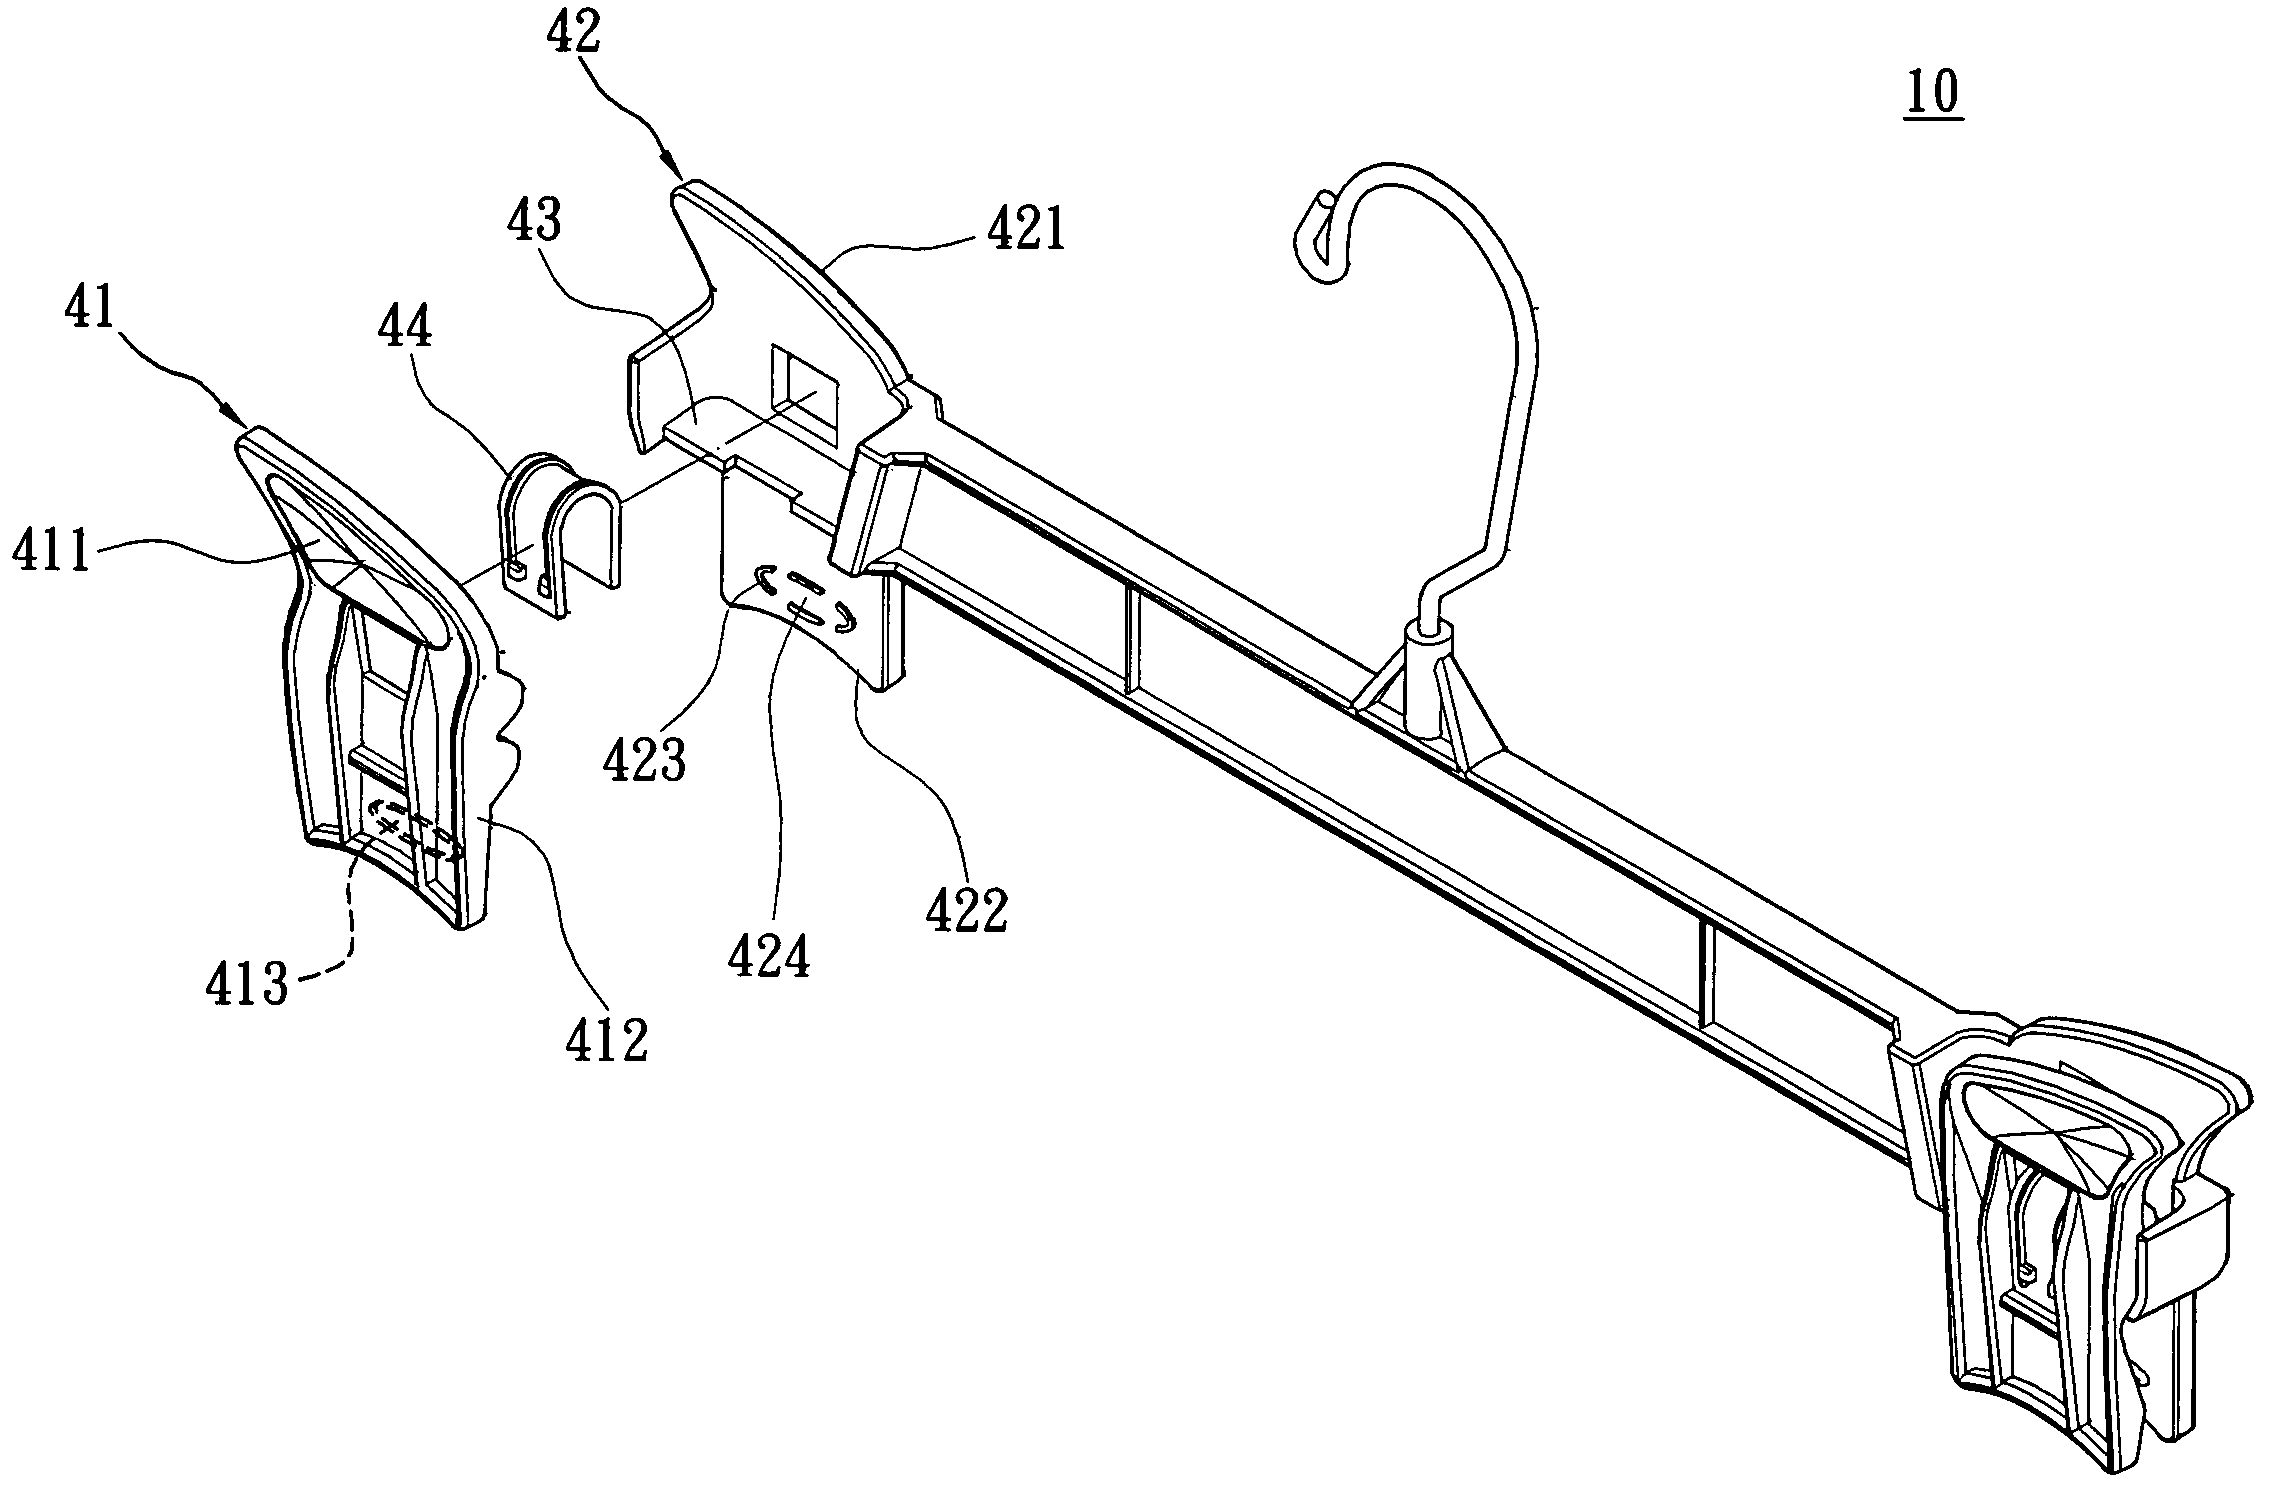 Garment hanger and clamps